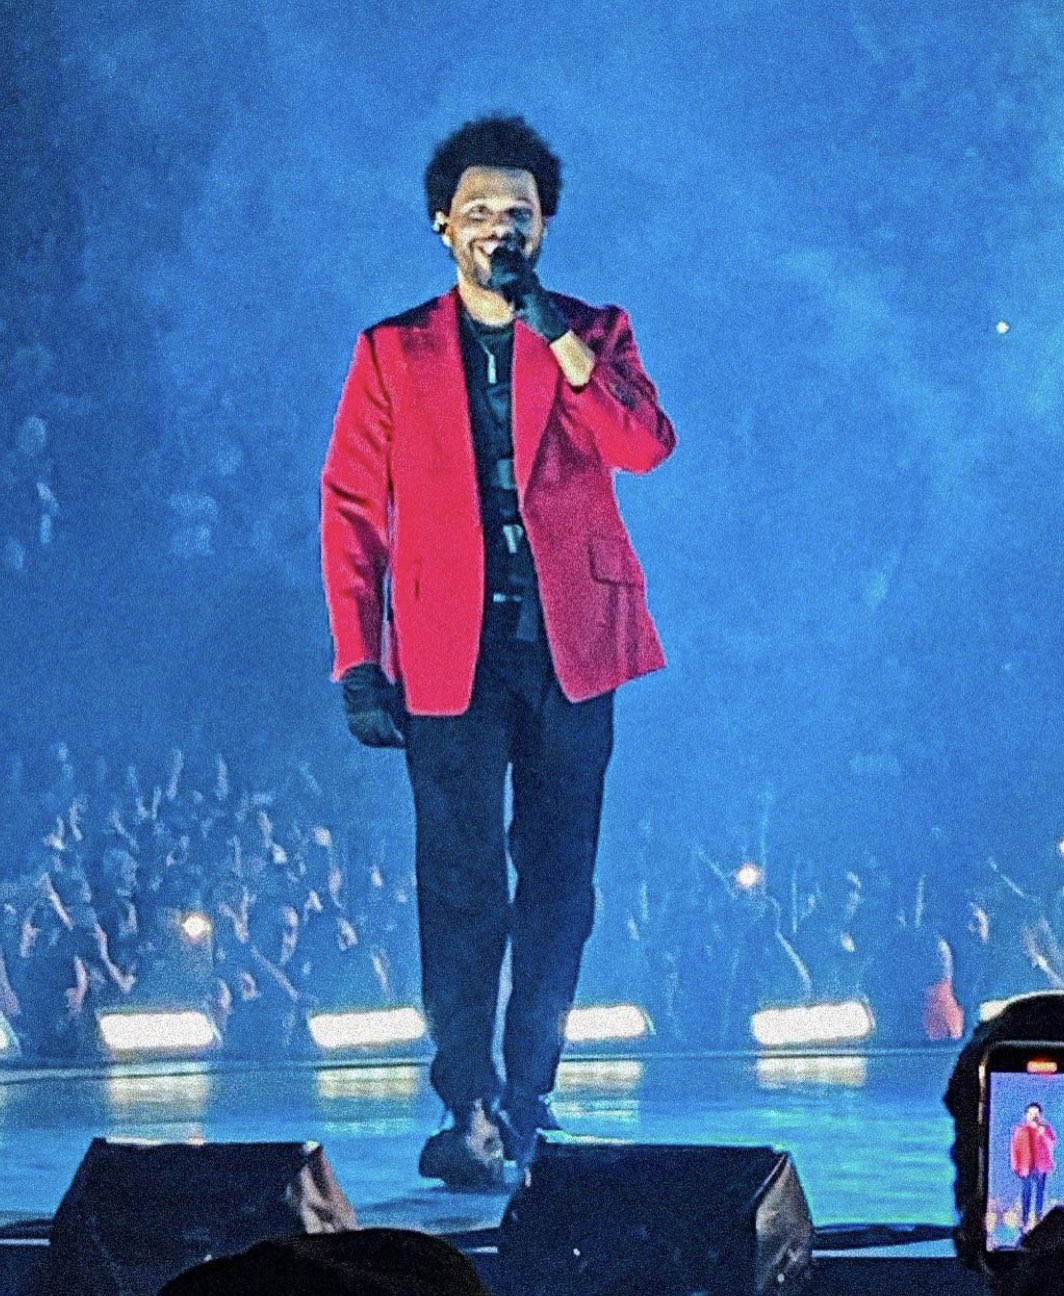 The Weeknd Access on X: The Weeknd wears the red jacket for the